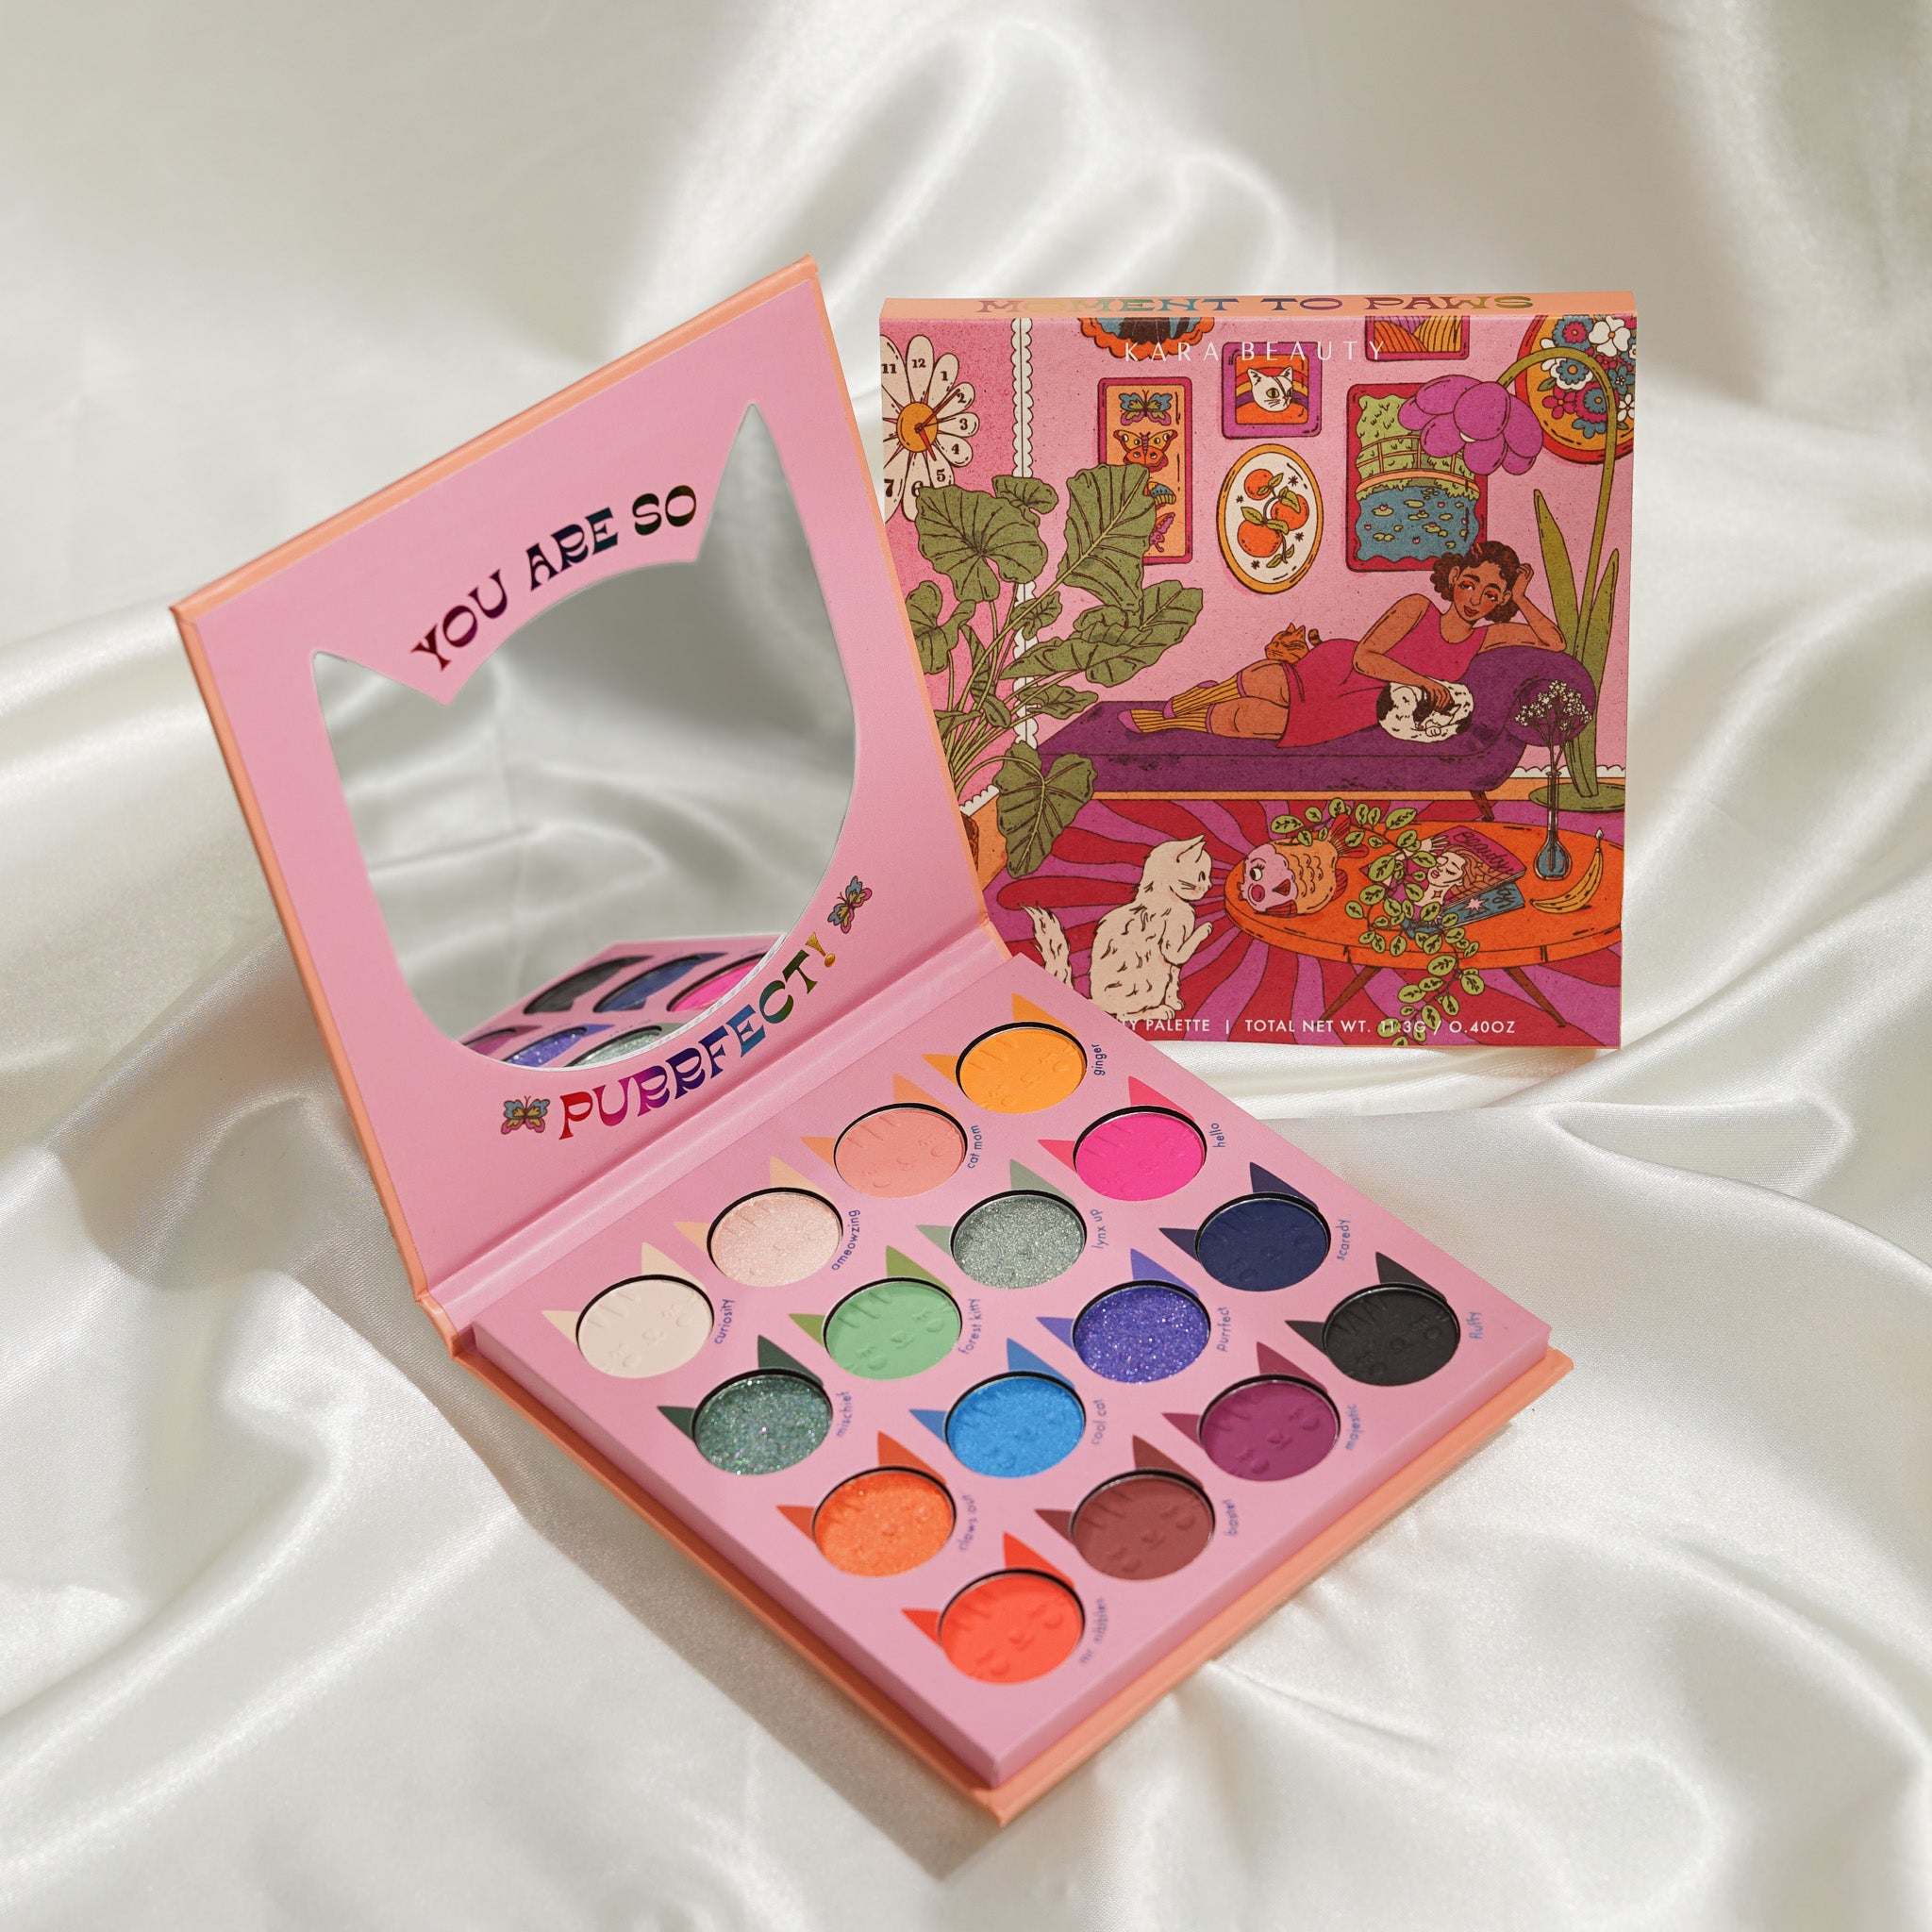 MOMENT TO PAWS Creative Beauty Eye Palette